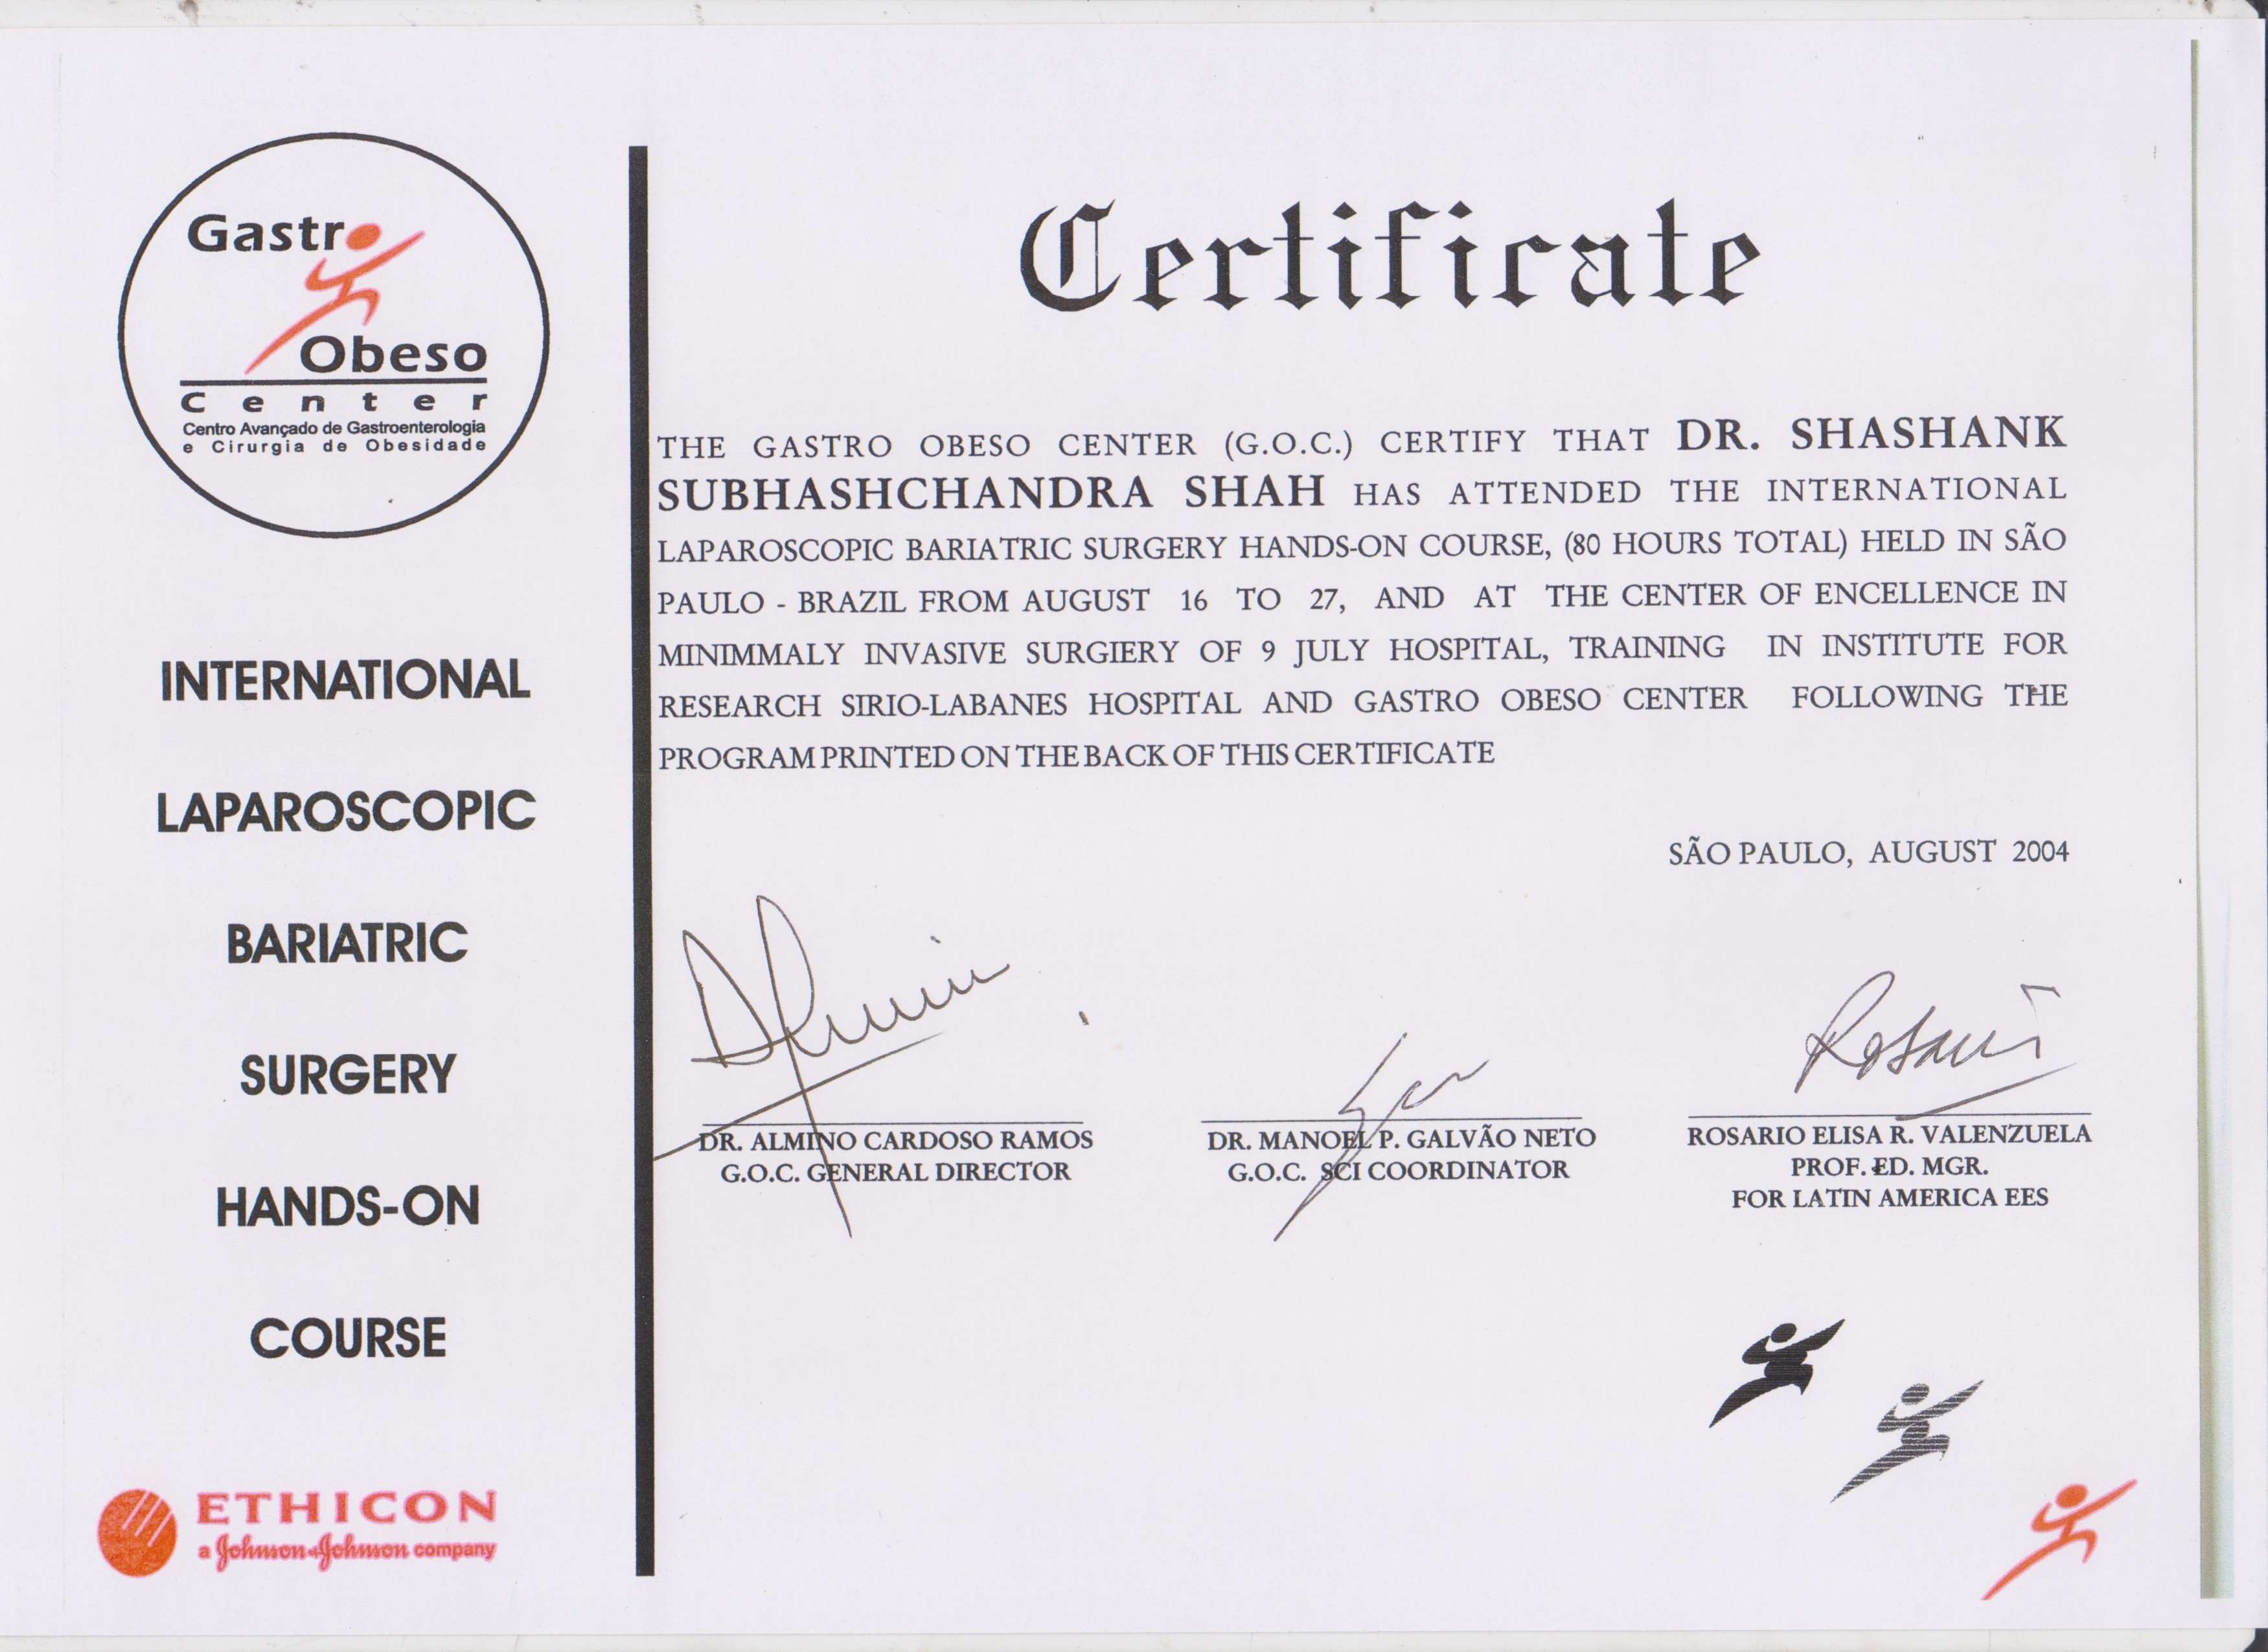 Certificate of Hands on Course in Laparoscopic Bariatric Surgery by the Gastro Obeso Centre held in Sao Paulo, Brazil in 2004.